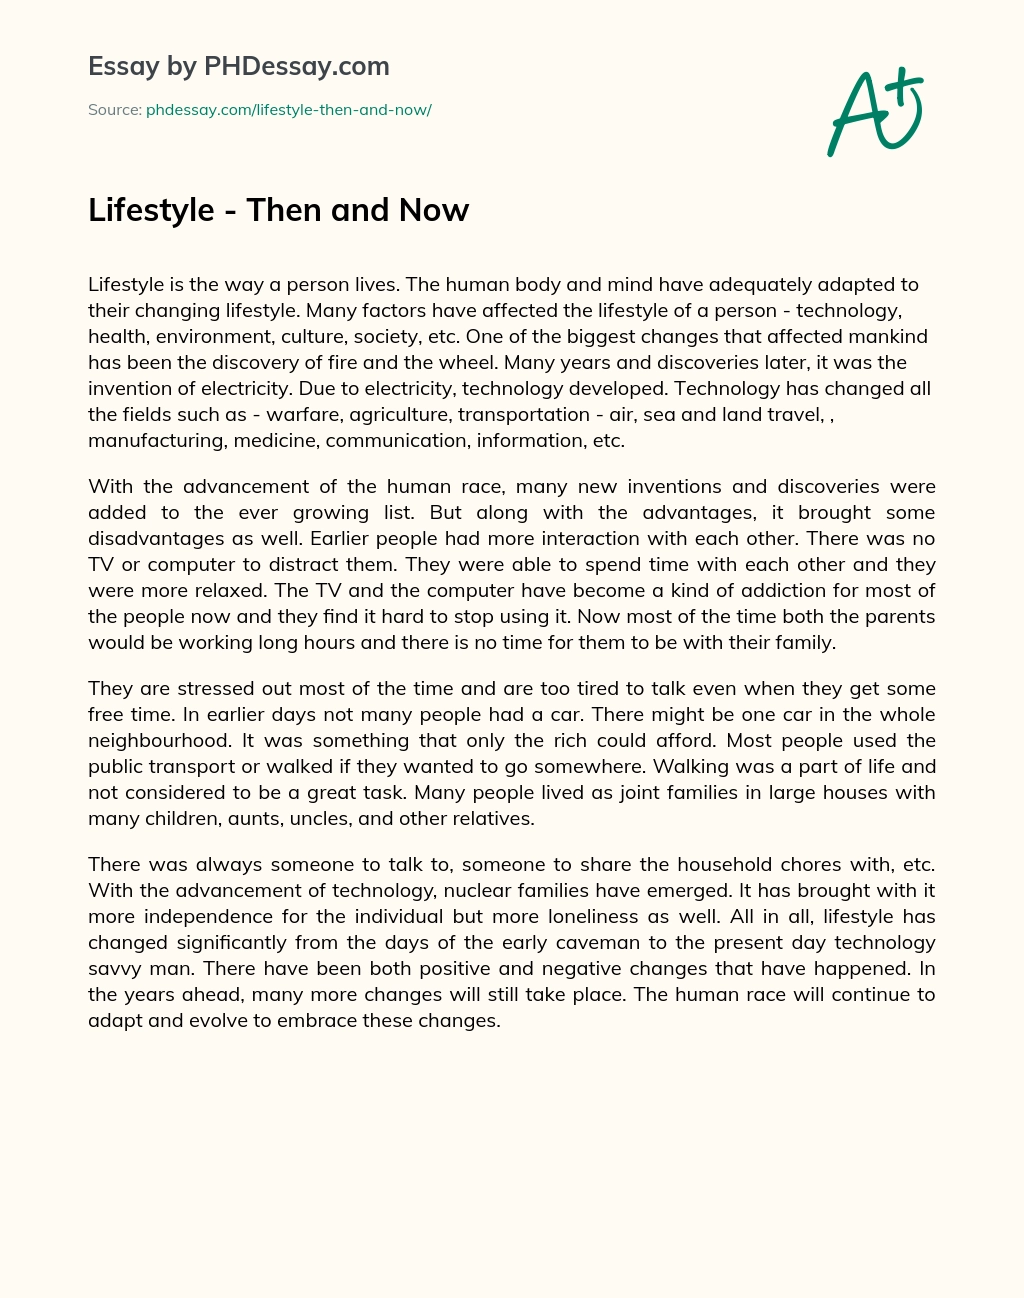 Lifestyle – Then and Now essay